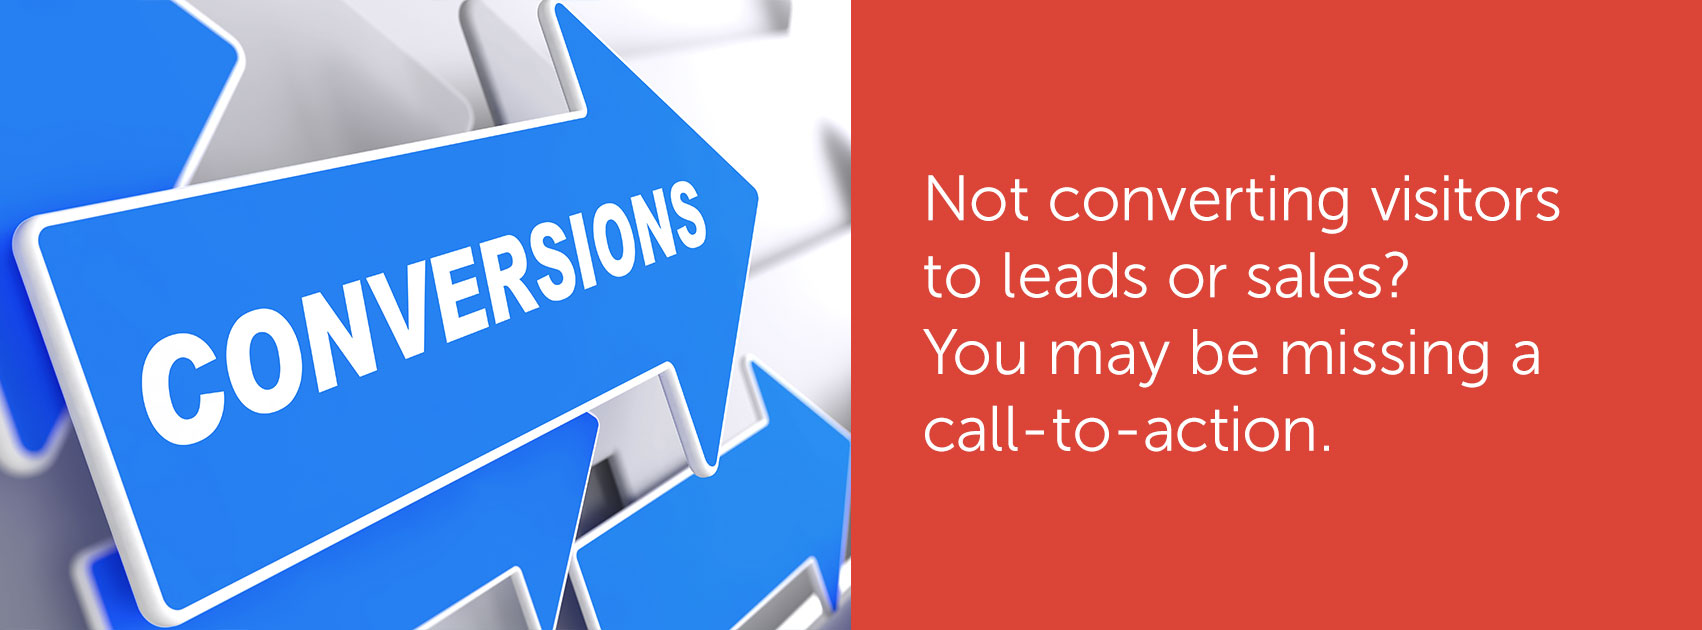 Not converting visitors to leads or sales? You may be missing a call to action.